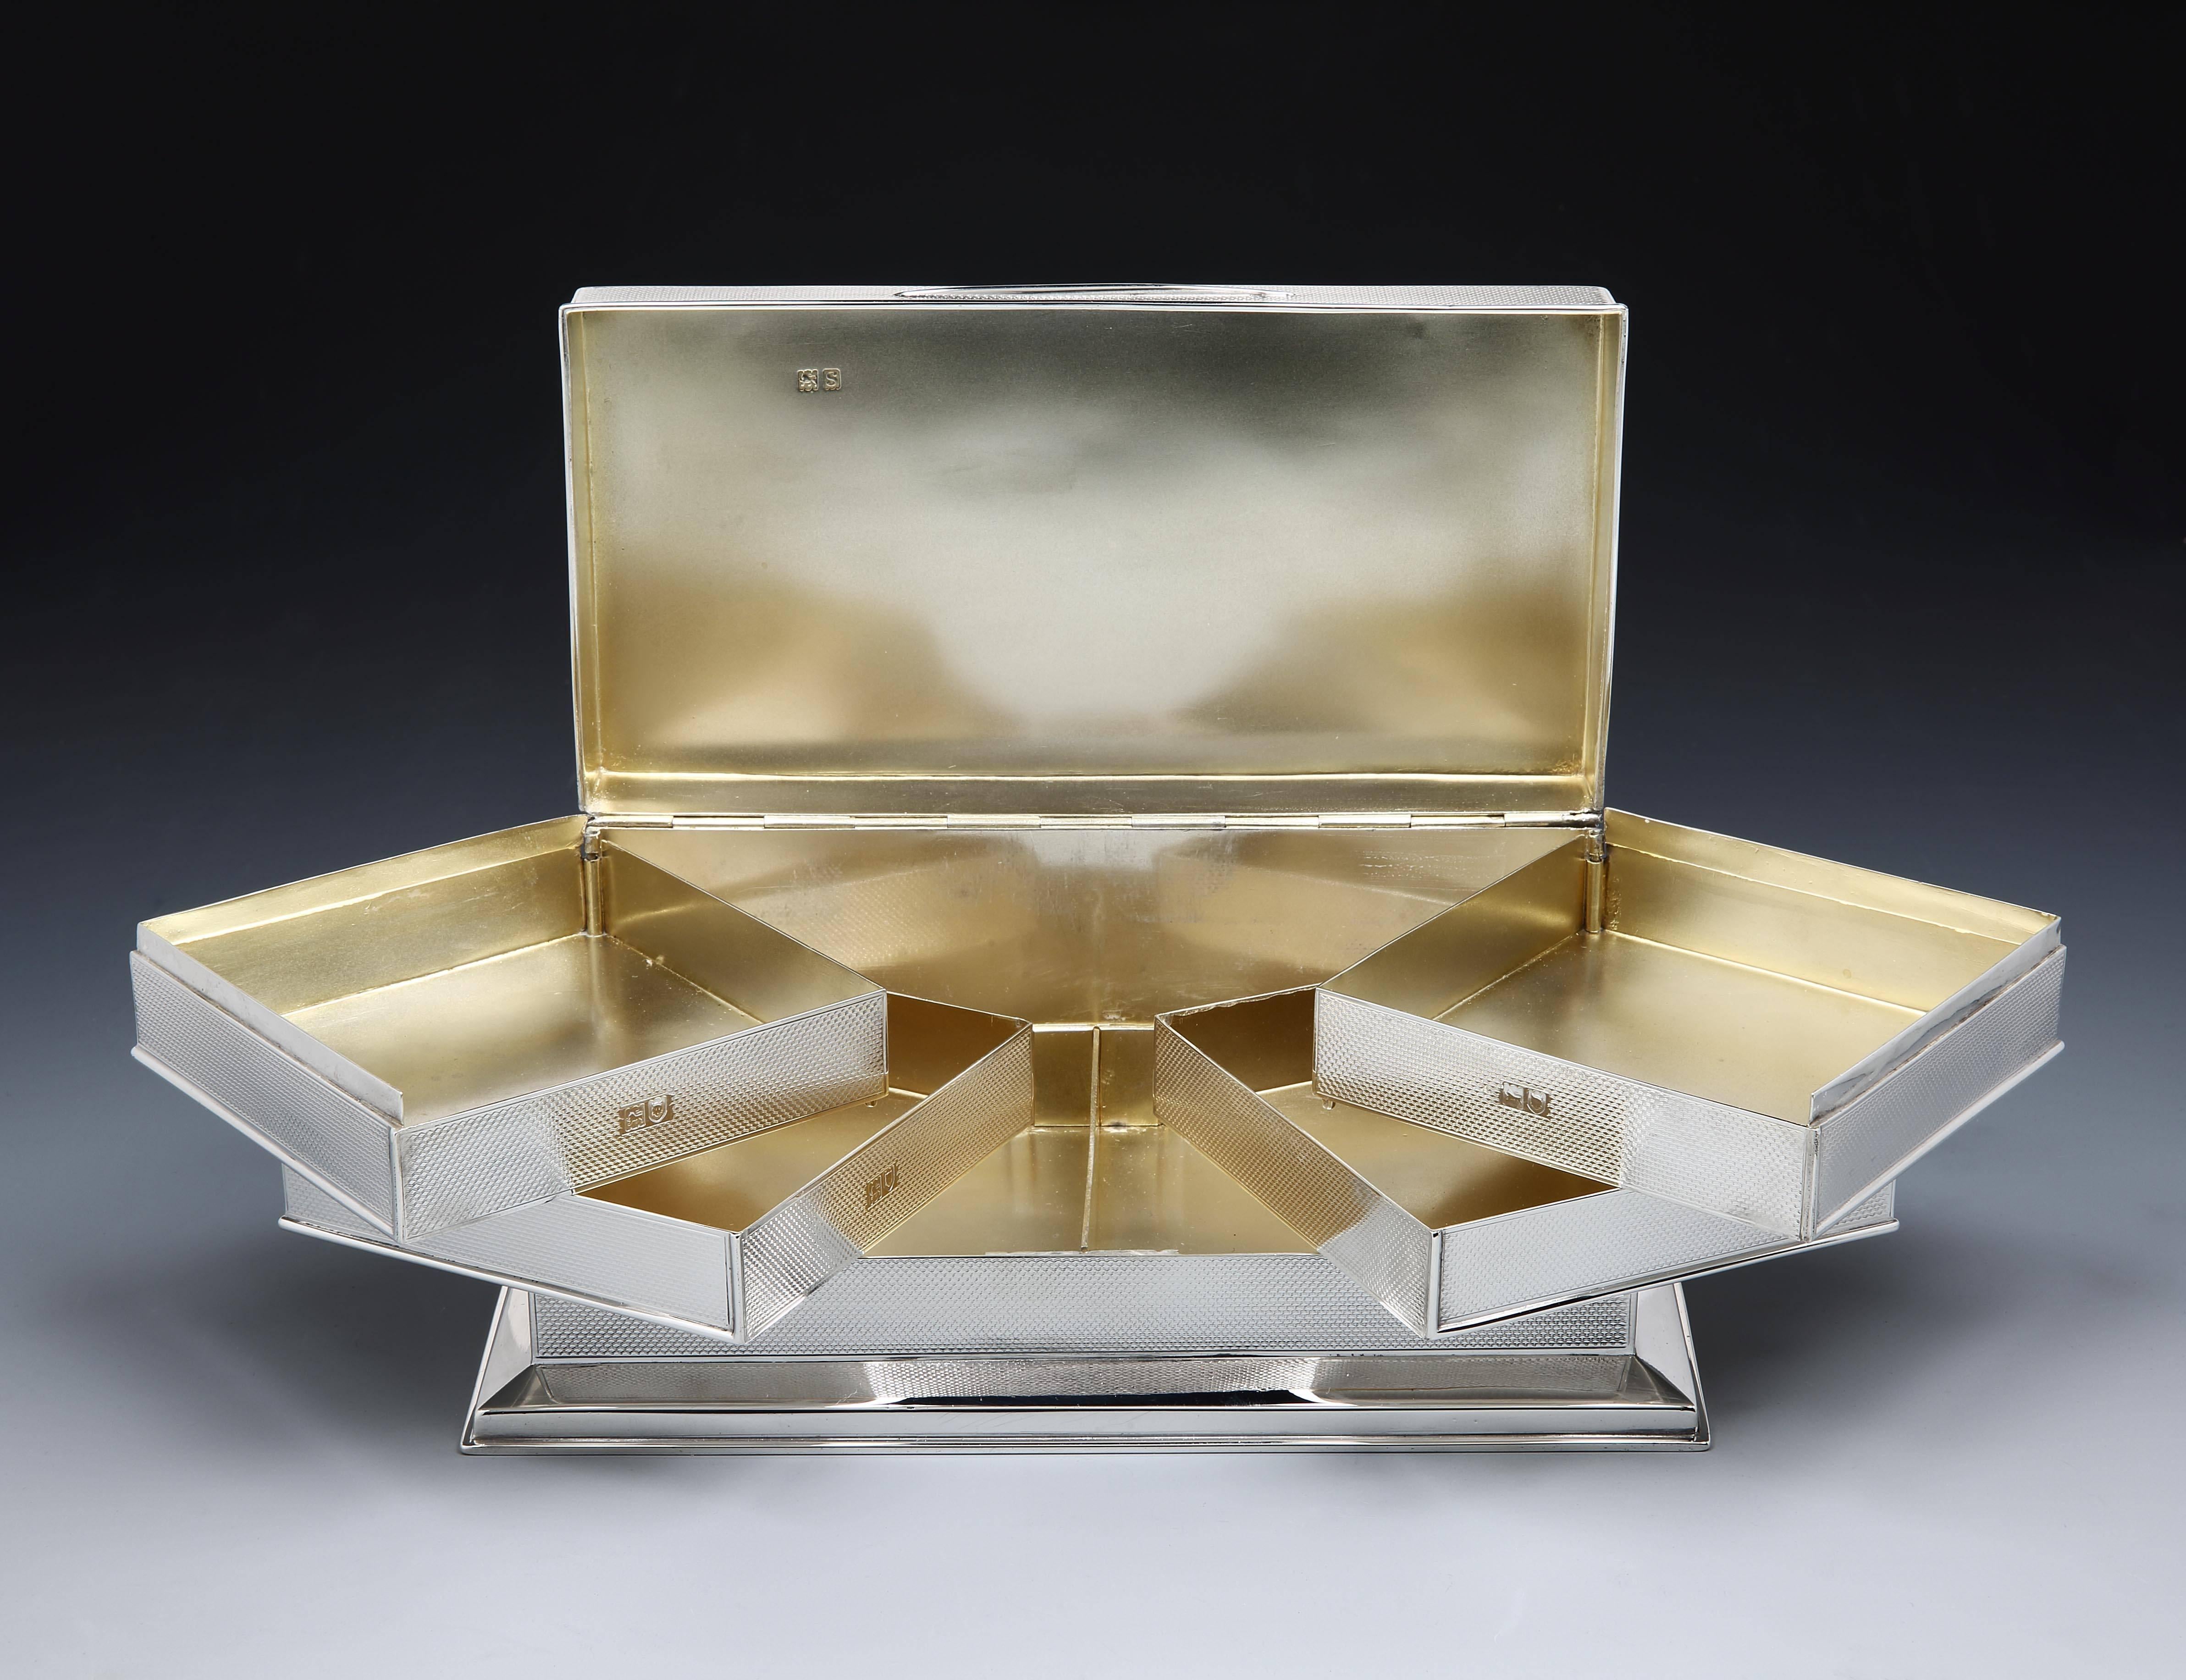 An unusually modernist-style, sterling silver cigarette or trinket box, the engine-turned body opening to reveal four lemon gilded compartments, hinged to allow them to ‘fan’ out. Hallmarked London, 1913. 

Makers marks are rubbed and indistinct but